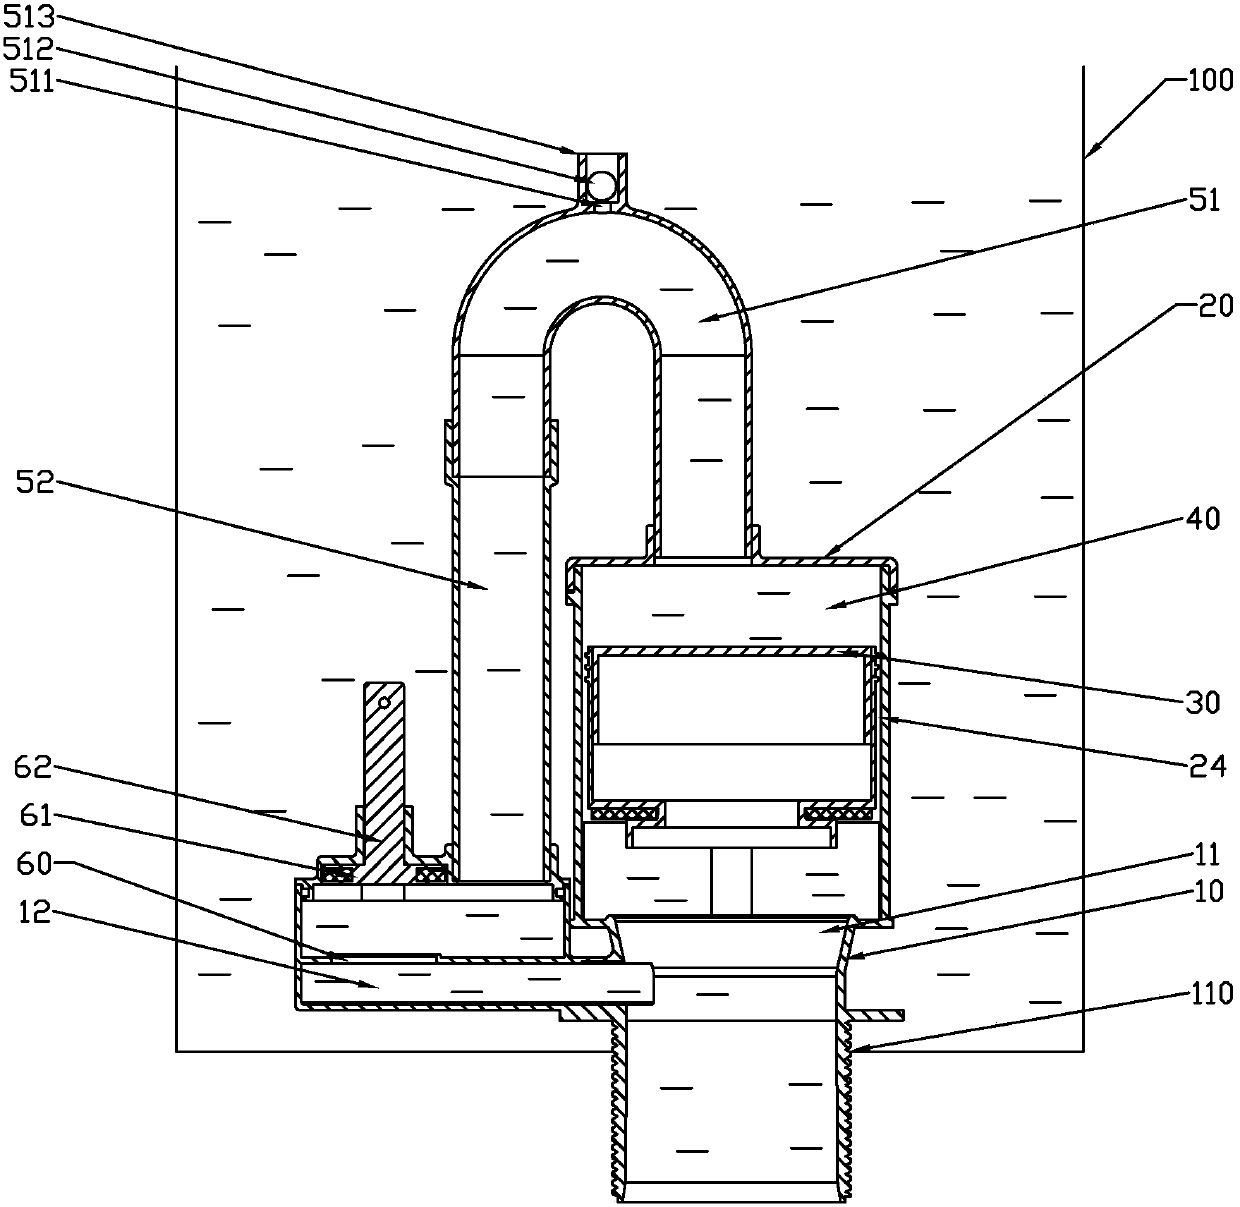 A water tank drainage device utilizing pressure difference for drainage